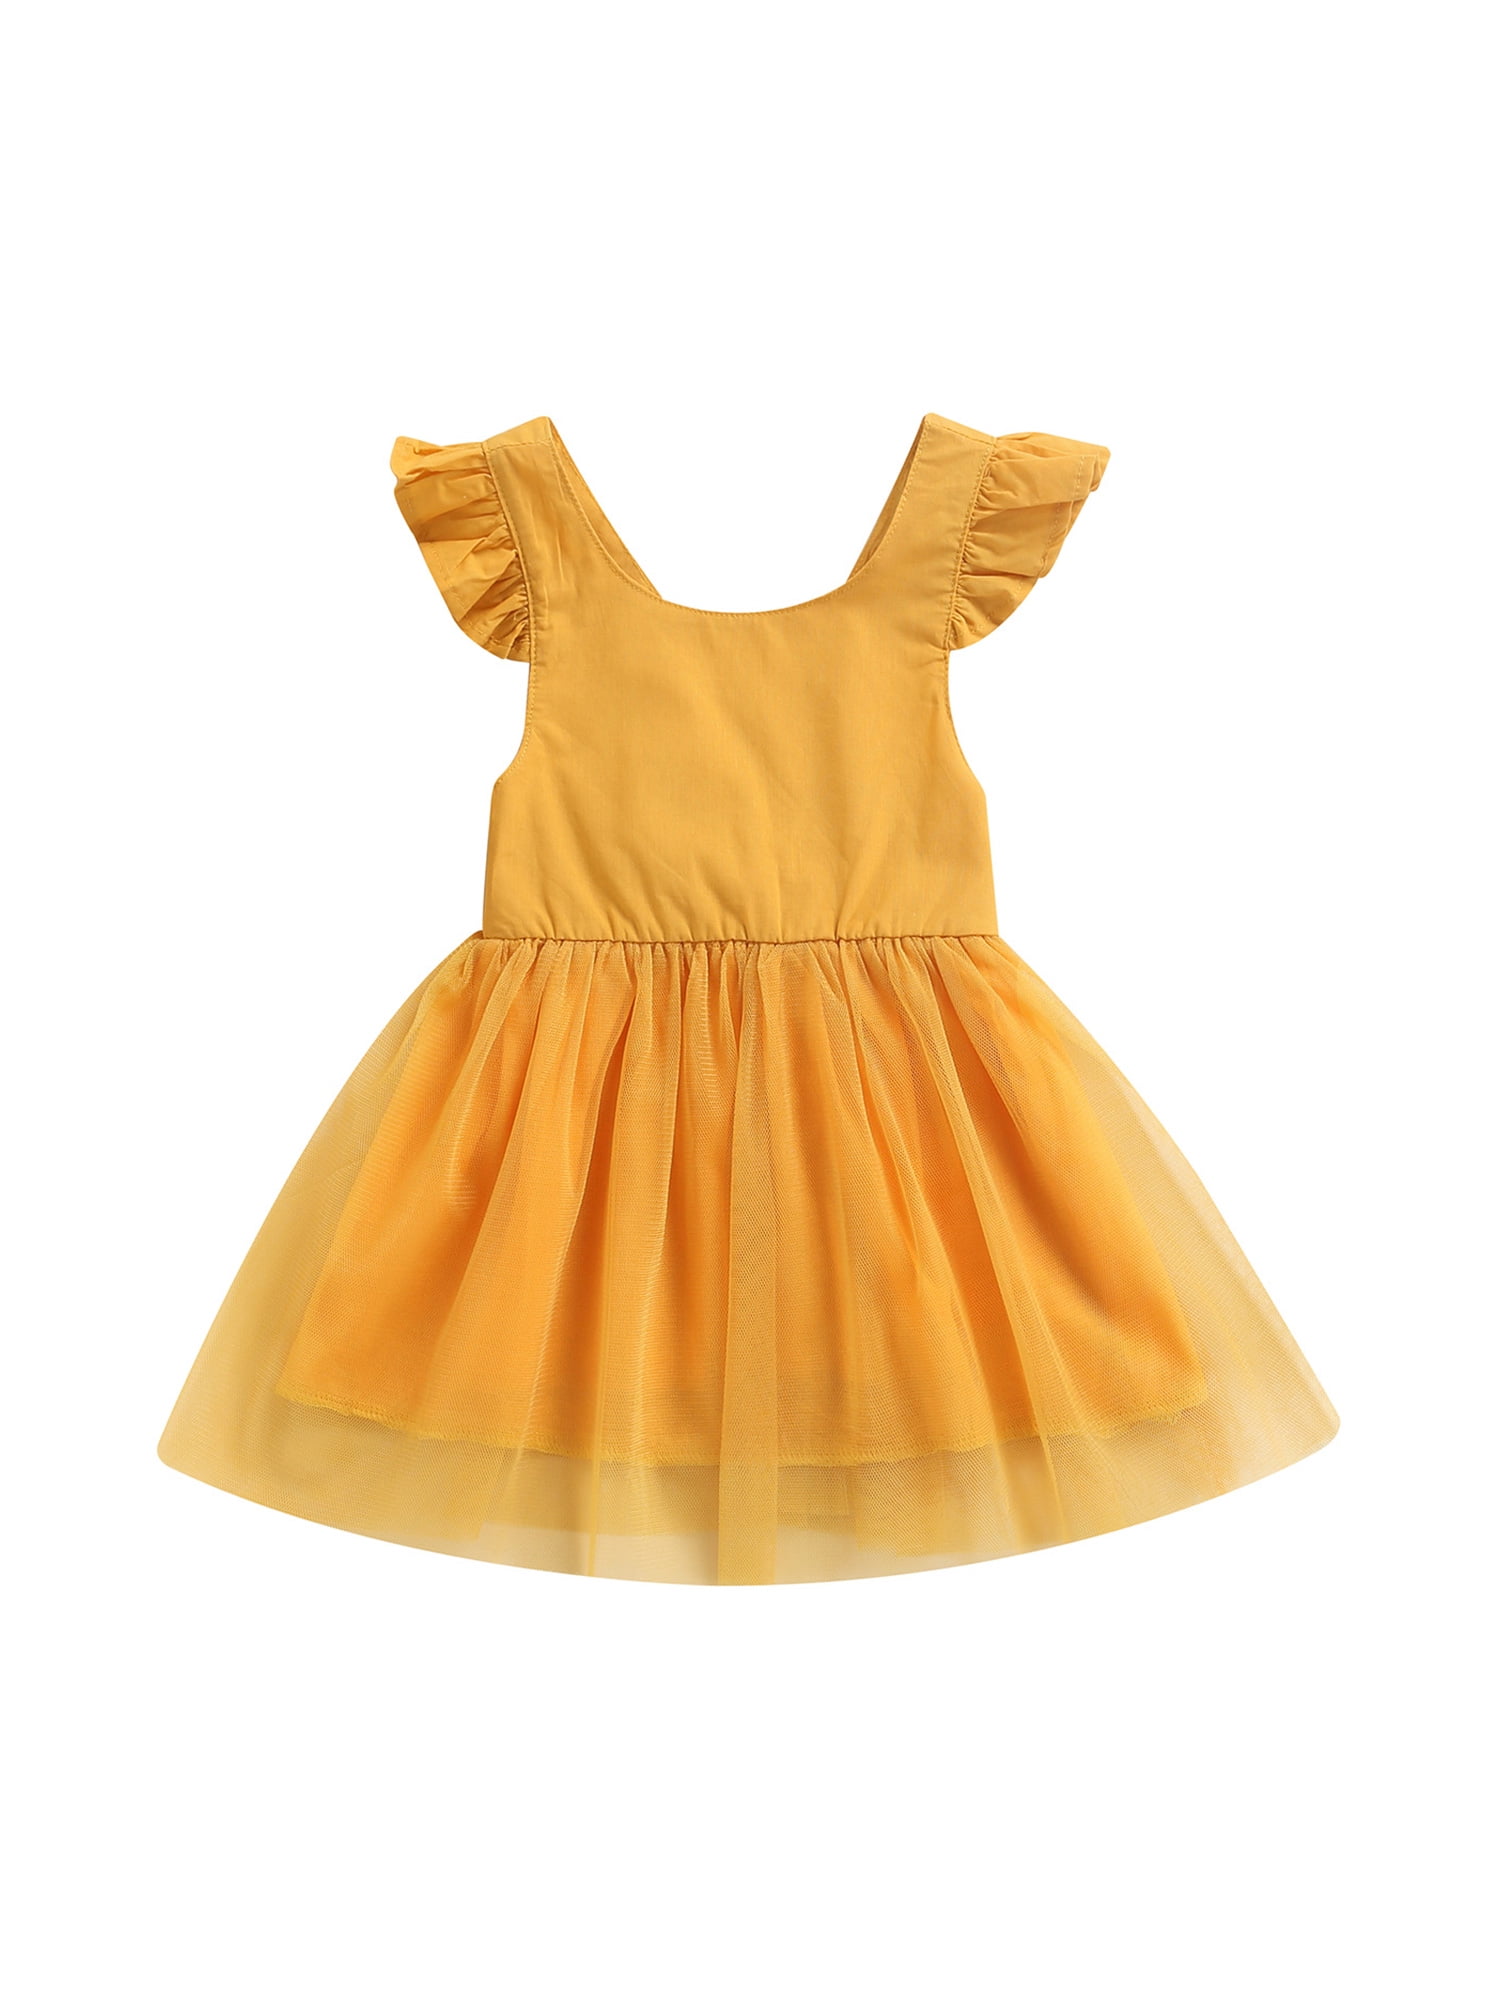 wybzd Baby Girls Fly Sleeve Dress Fashion Solid Color Round Neck